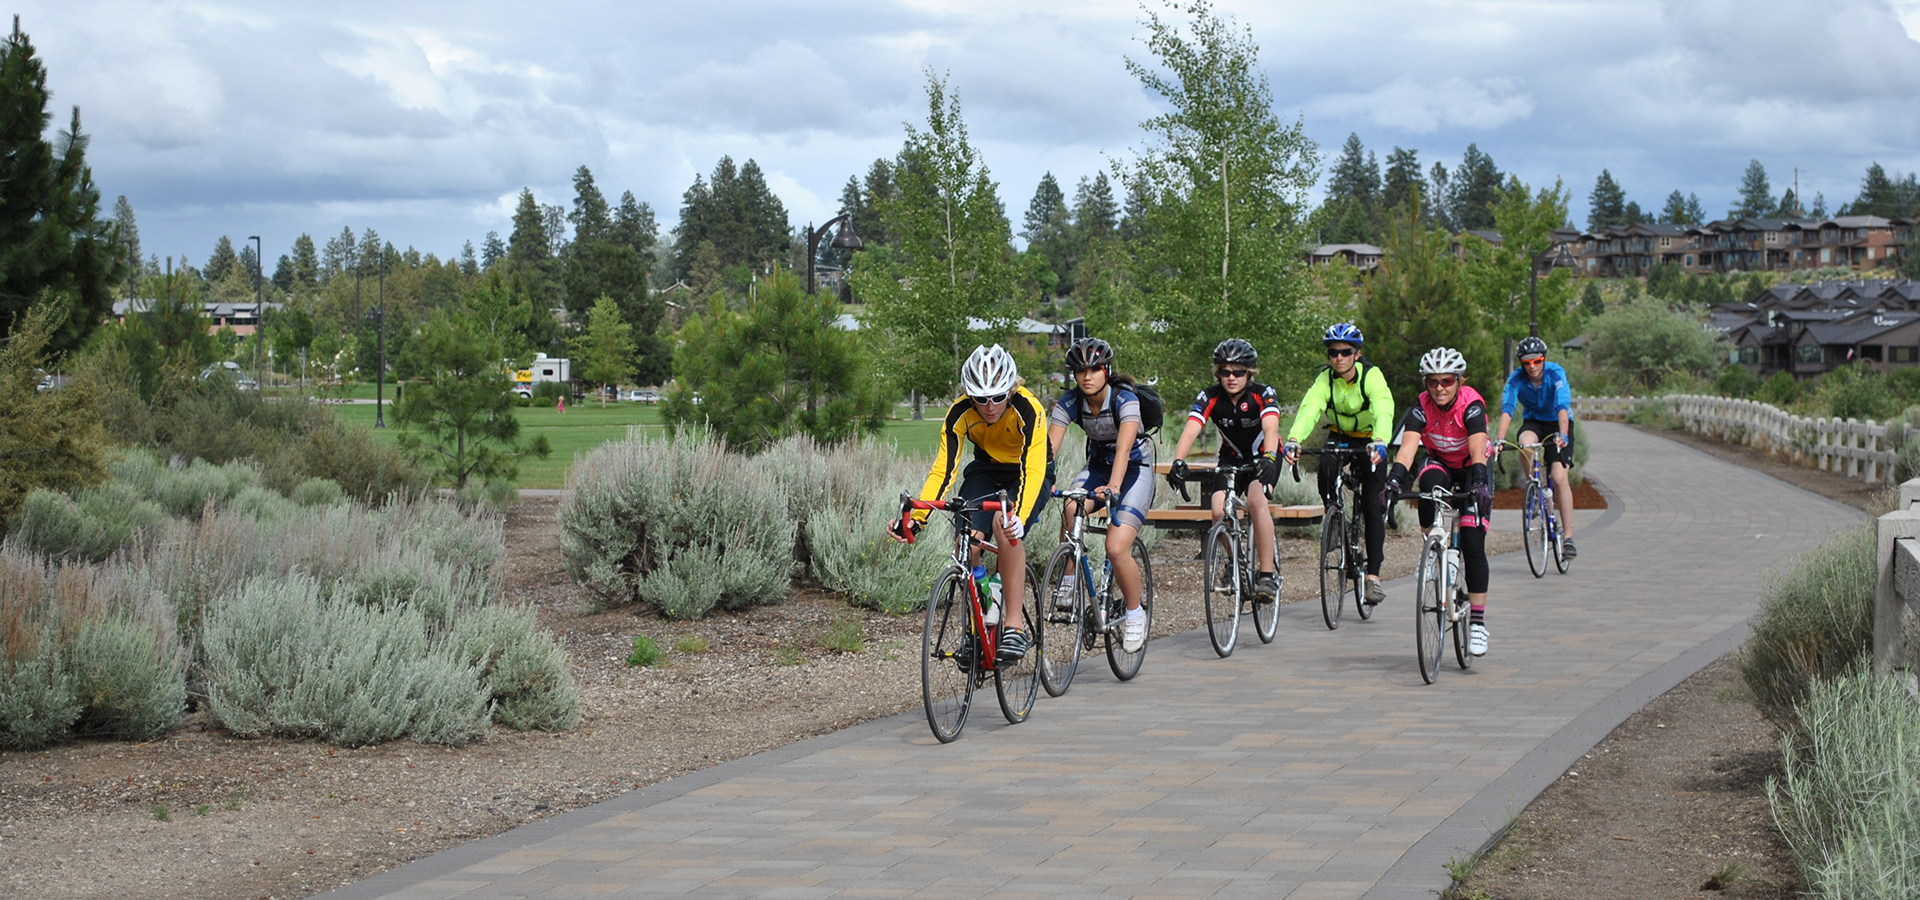 A group of cyclists on the Deschutes River Trail in Riverbend Park.